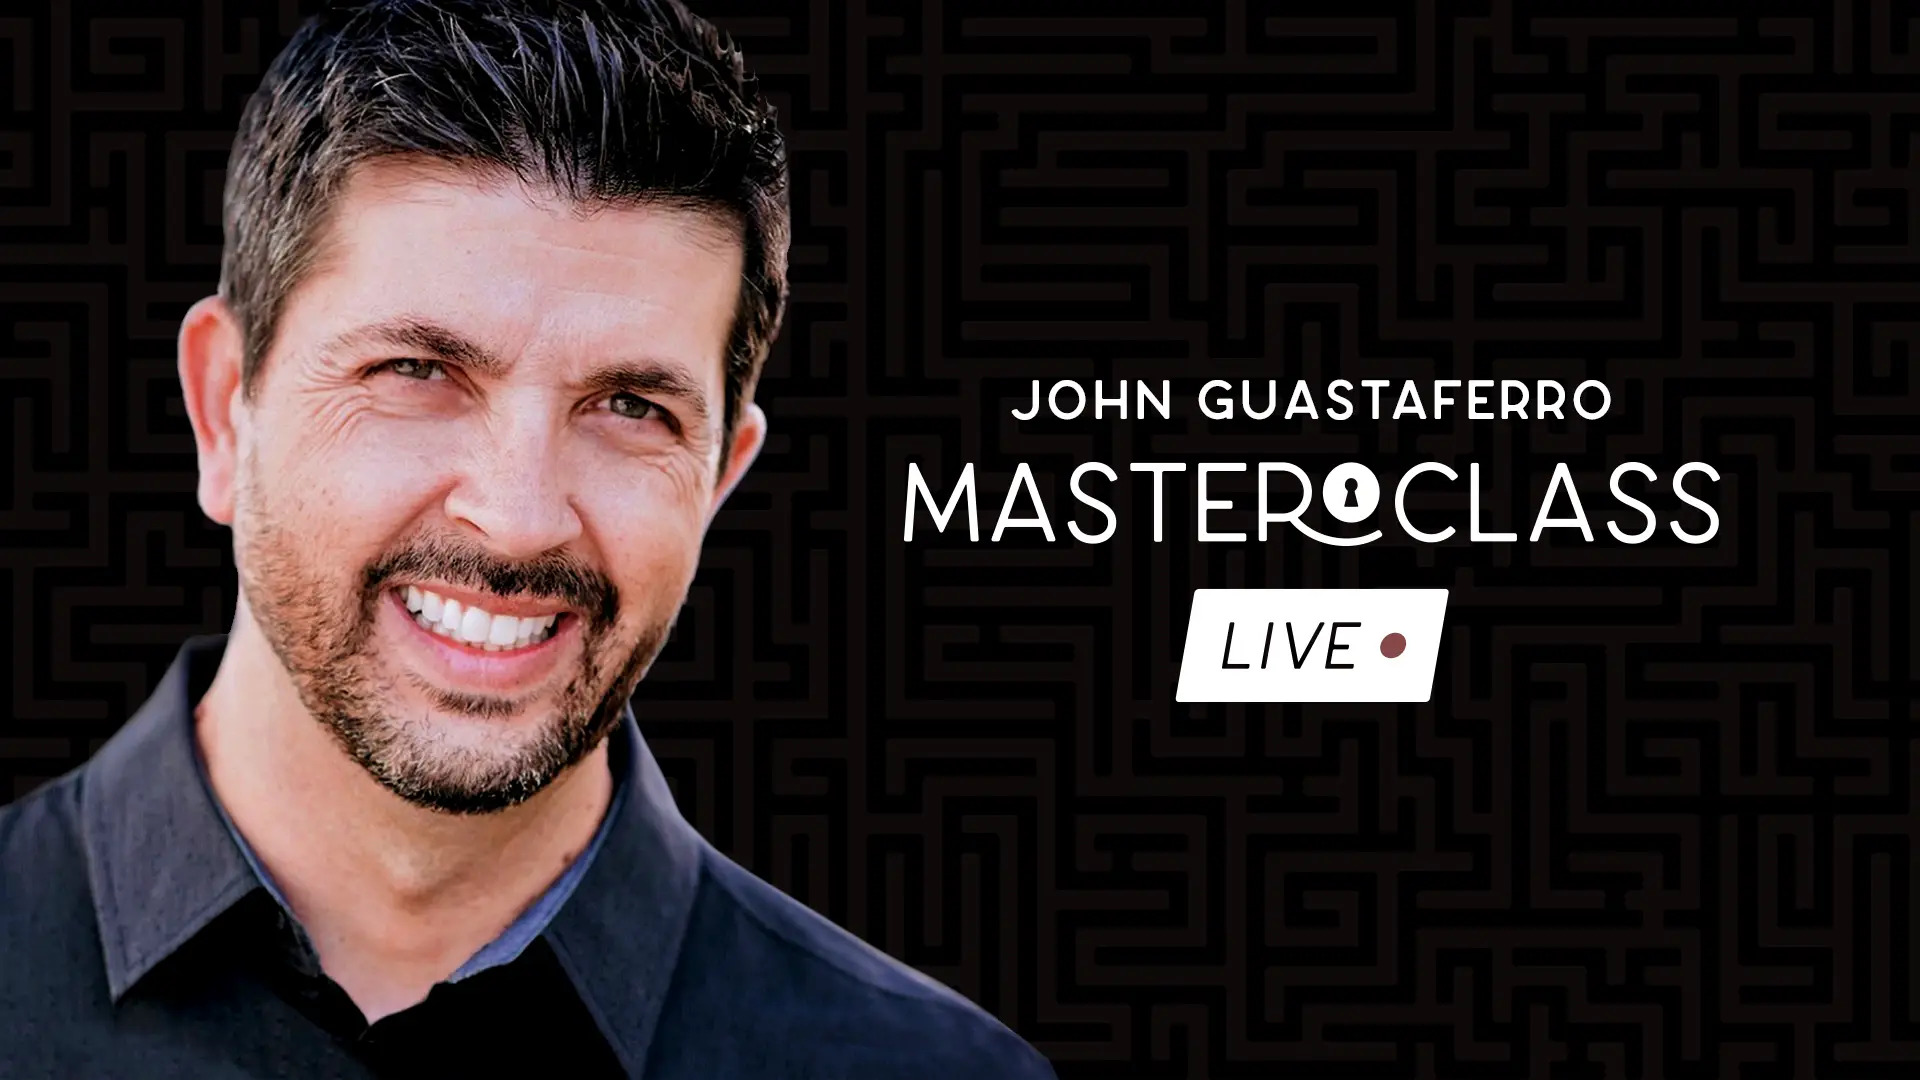 Masterclass Live Lecture by John Guastaferro (Week 3) (MP4 Video Download)